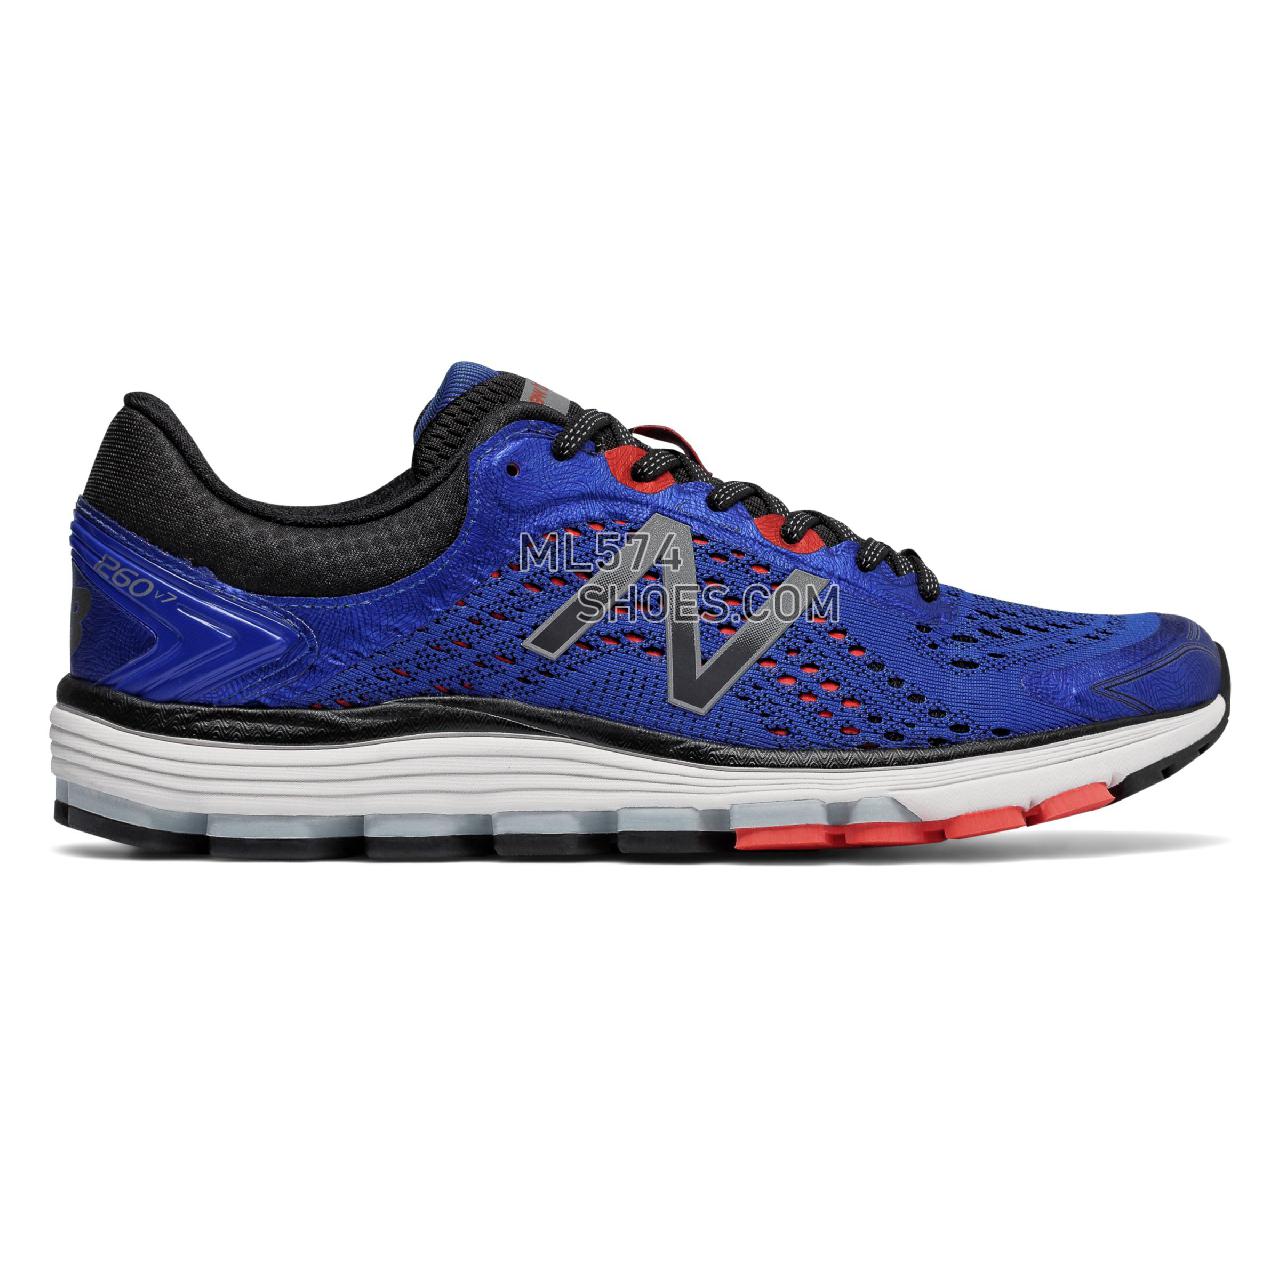 New Balance 1260v7 - Men's 1260 - Running Pacific with Black and Flame - M1260BO7